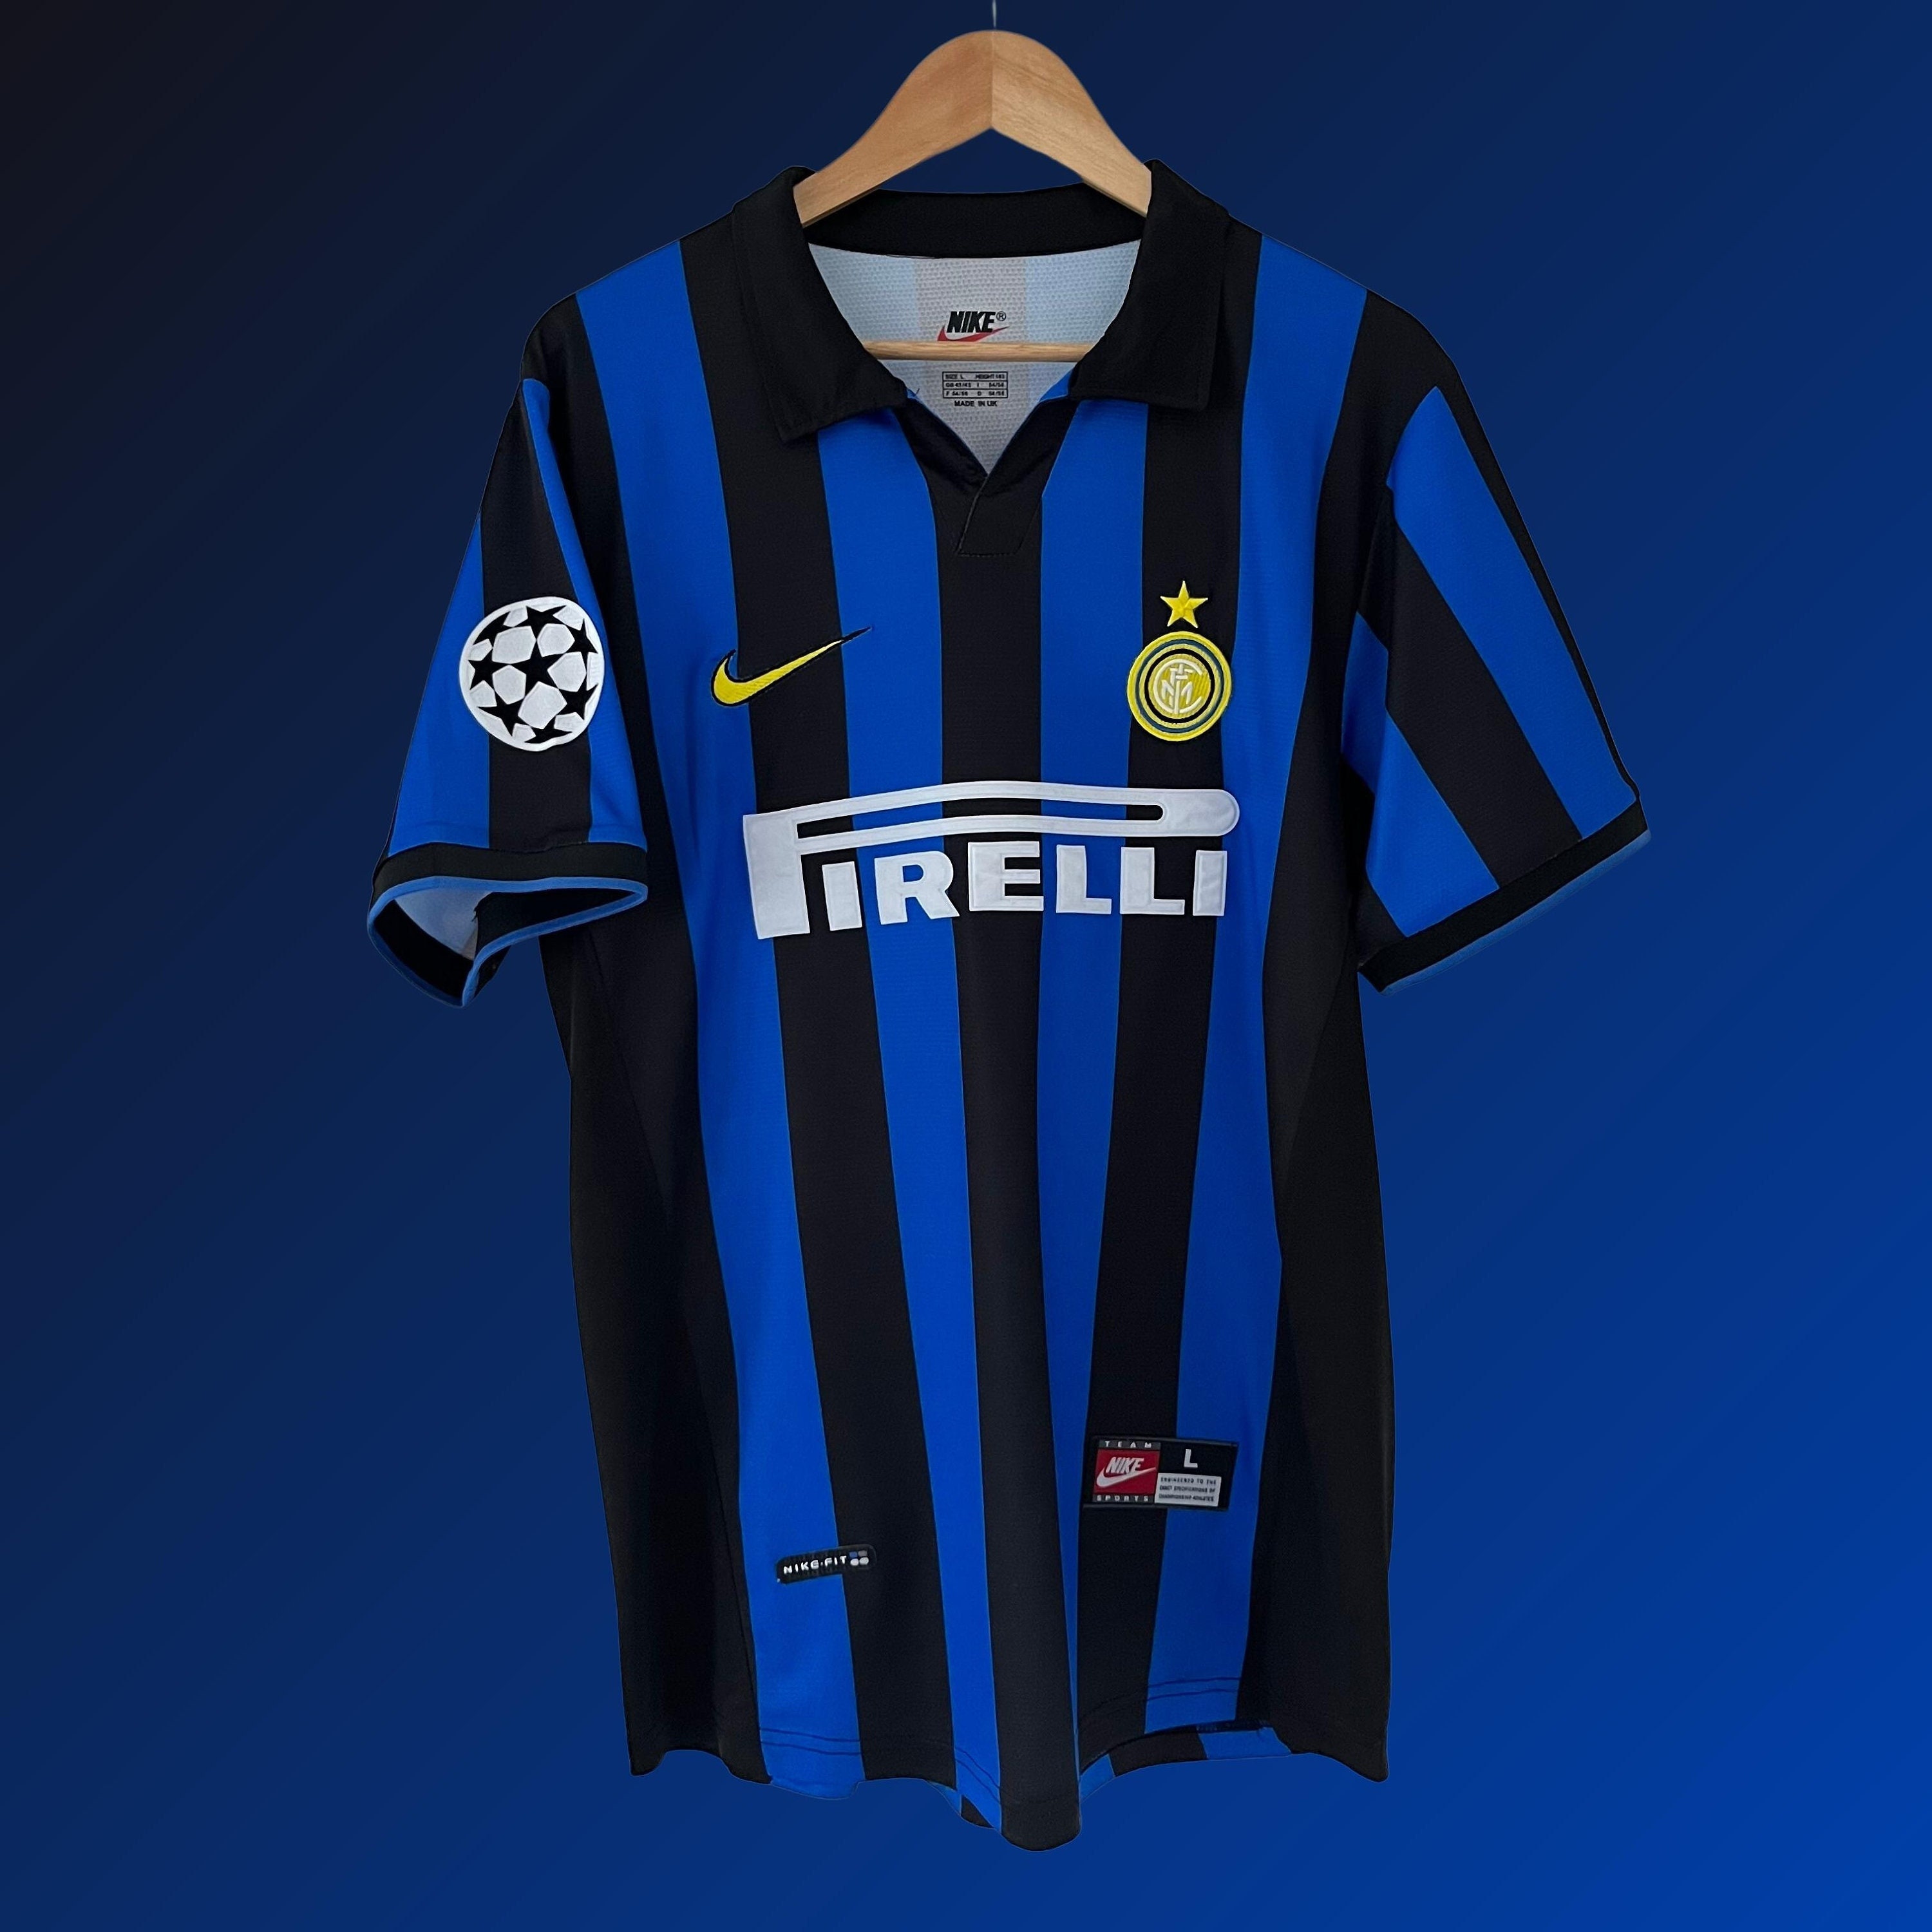 Adriano Inter Milan Nike Soccer Jersey Shirt 08/09 Size S w/Serie A Patch